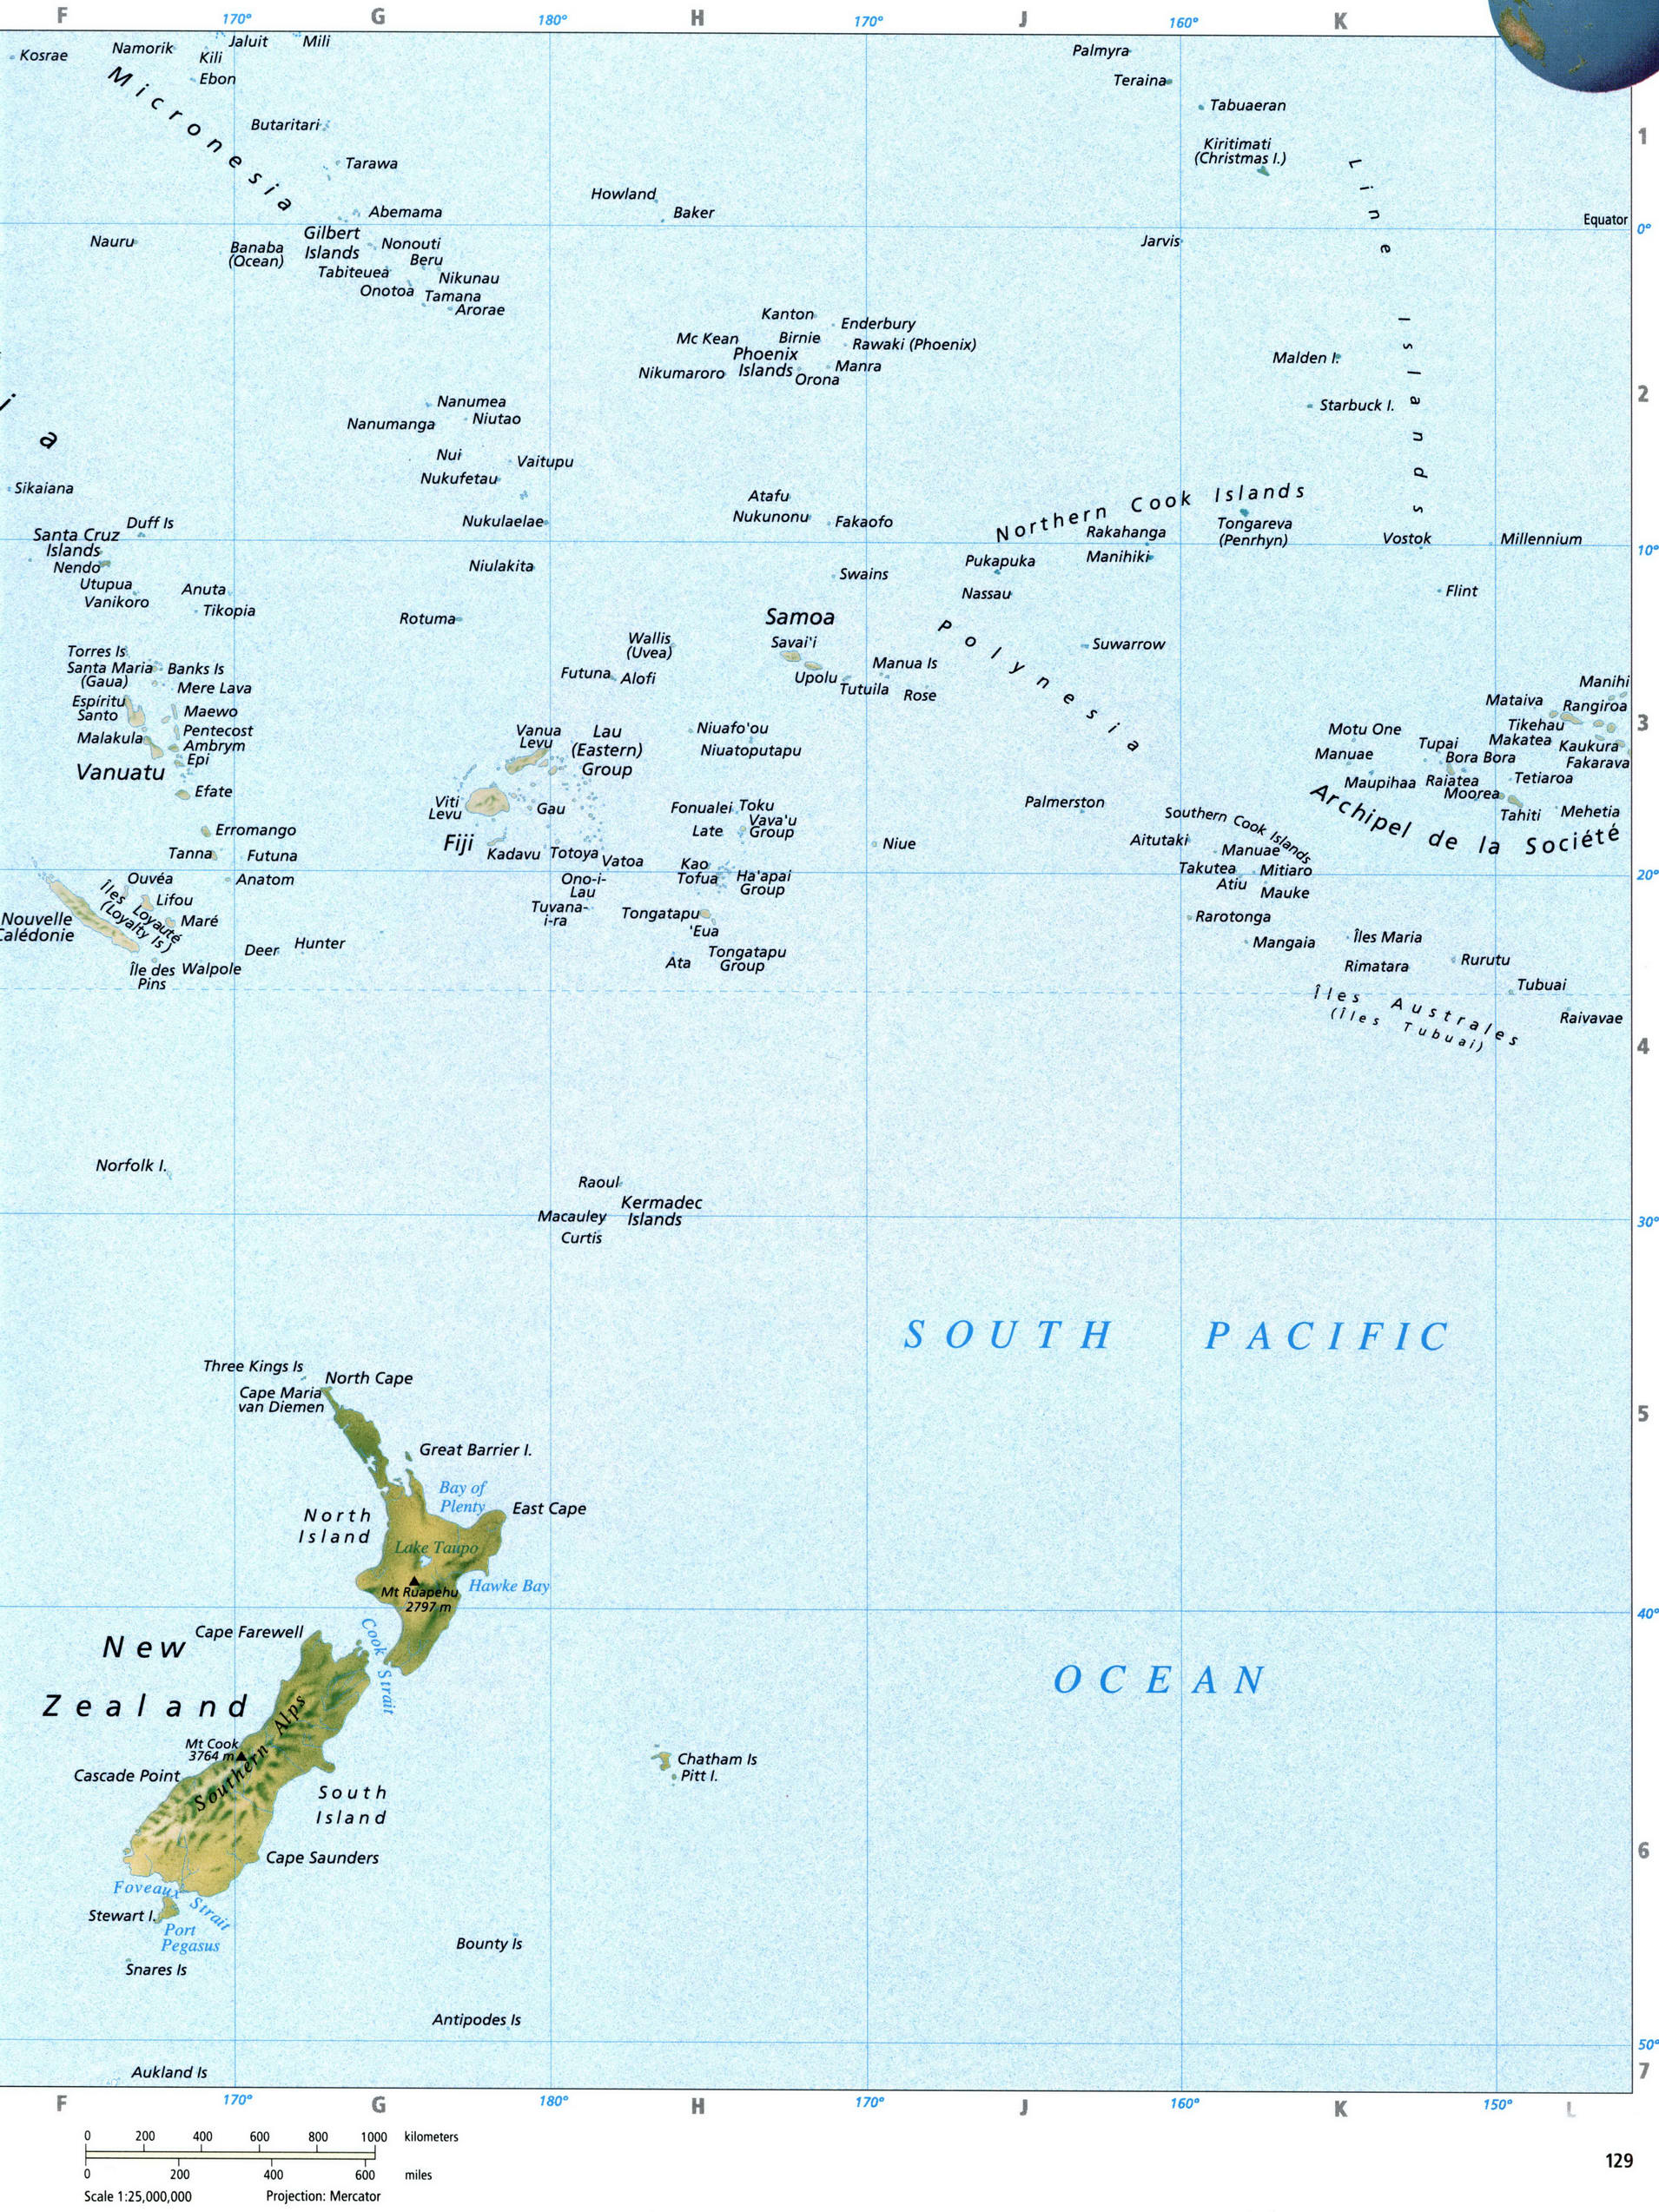 Australia and Oceania detailed map